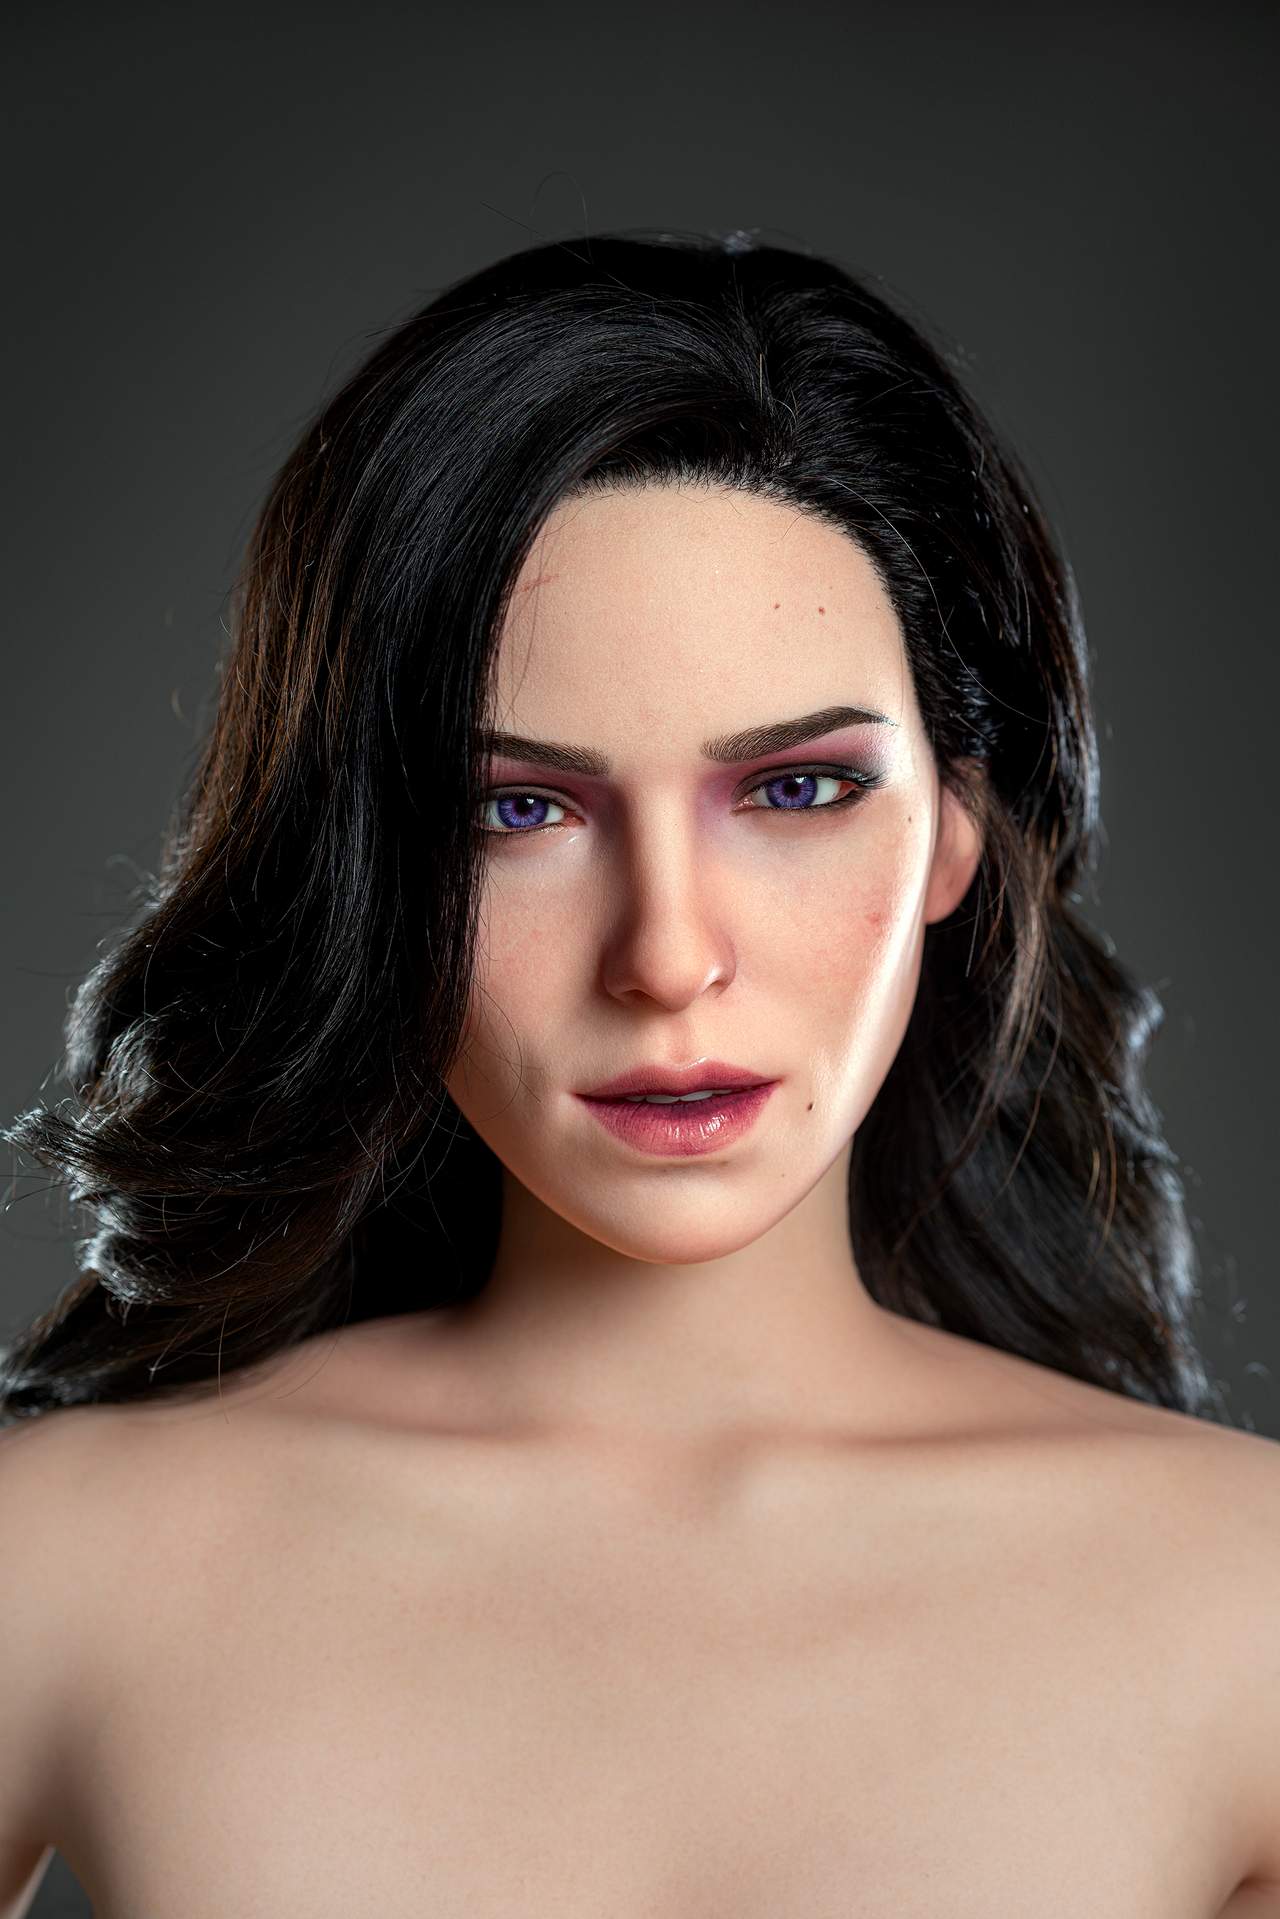 Yennefer  : Resident Evil 3's Hottest Actress in Full Silicon